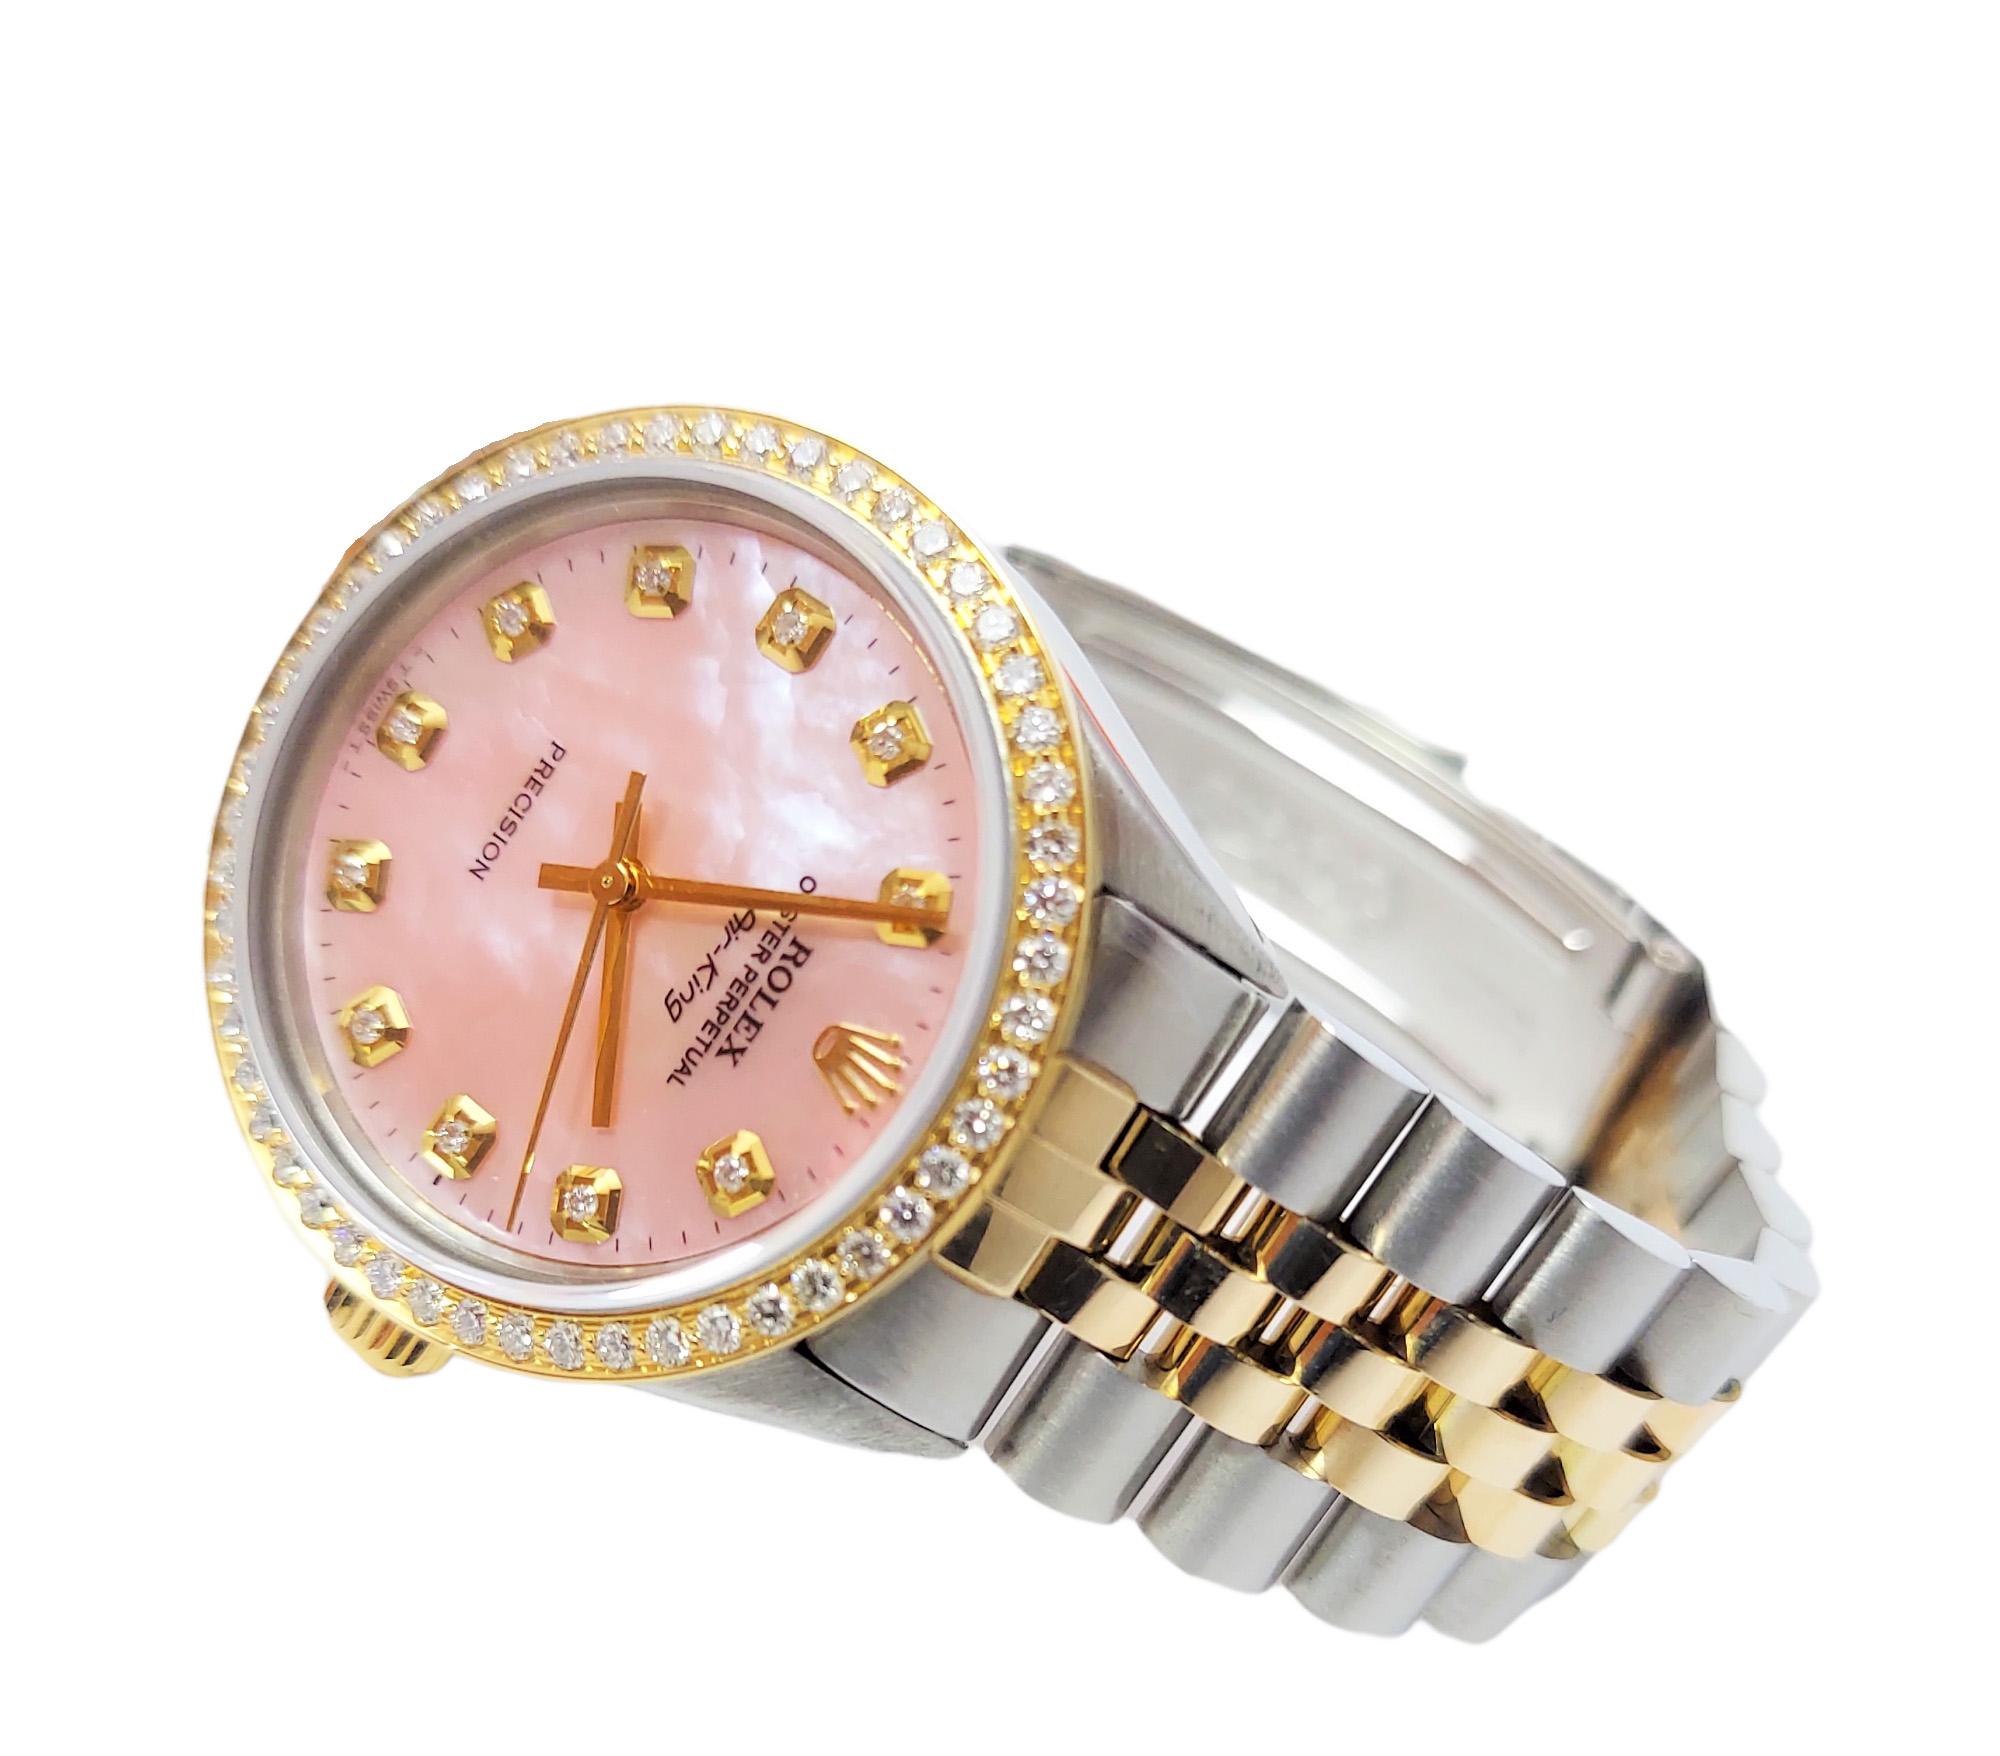 Brand - Rolex
Gender - Unisex
Model - 5500-AIR KING
Condition - pre owned
Metals - Stainless steel
Case size - 34 mm
Bezel - Steel Gold plated 1CT diamond
Crystal - sapphire
Movement - Automatic cal 1570
Dial - Refinished Mother of pearl pink